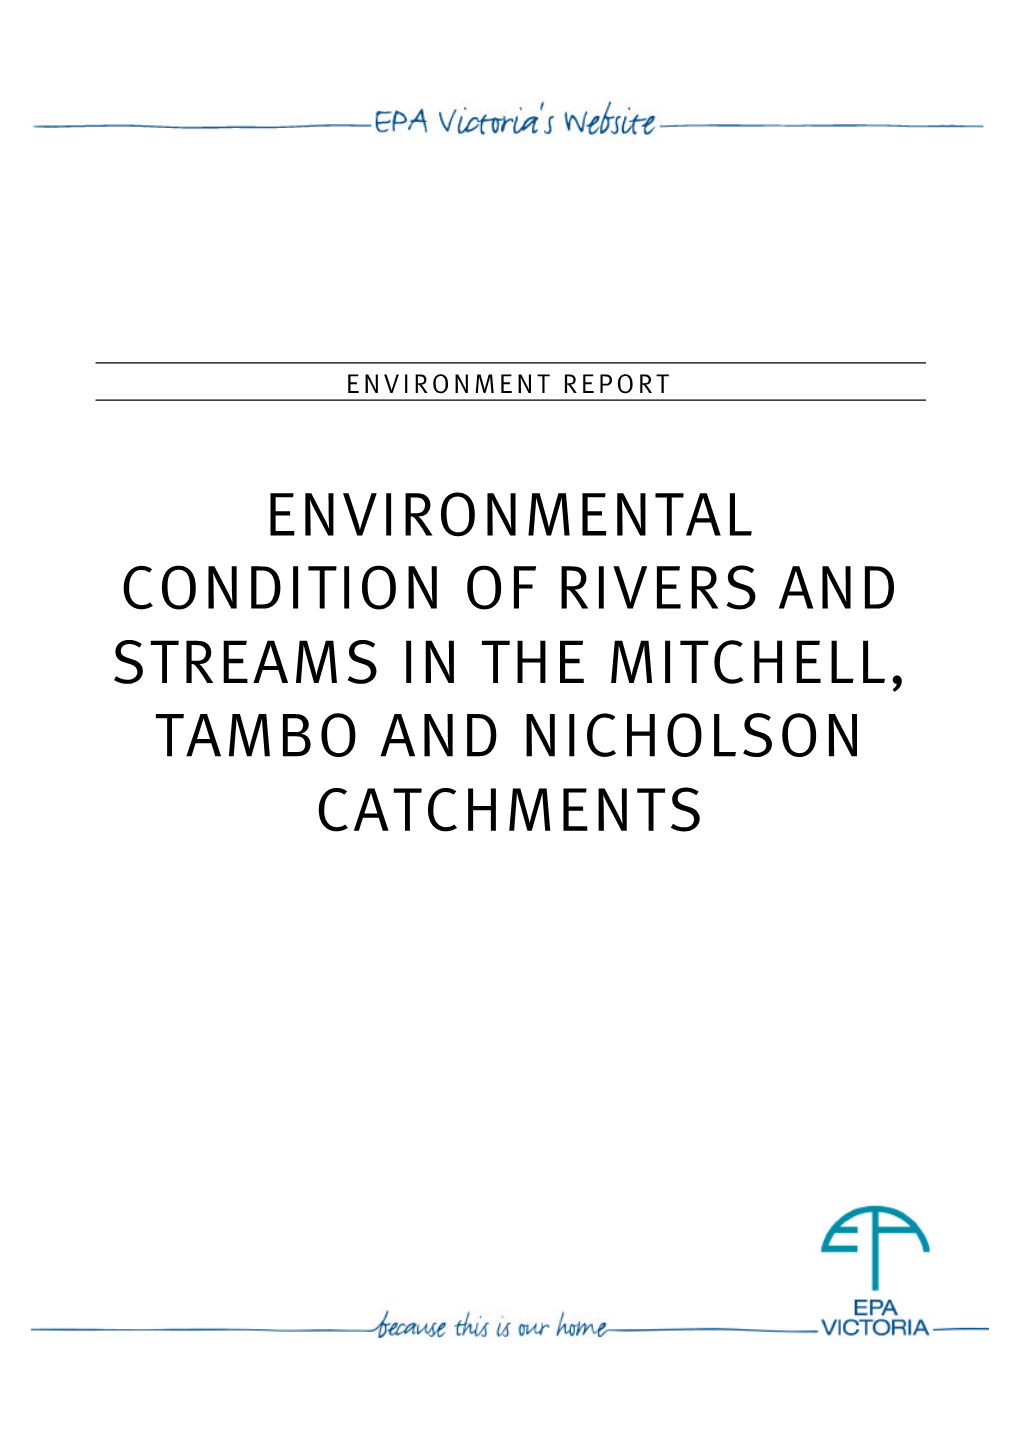 Environmental Condition of Rivers and Streams in the Mitchell, Tambo and Nicholson Catchments